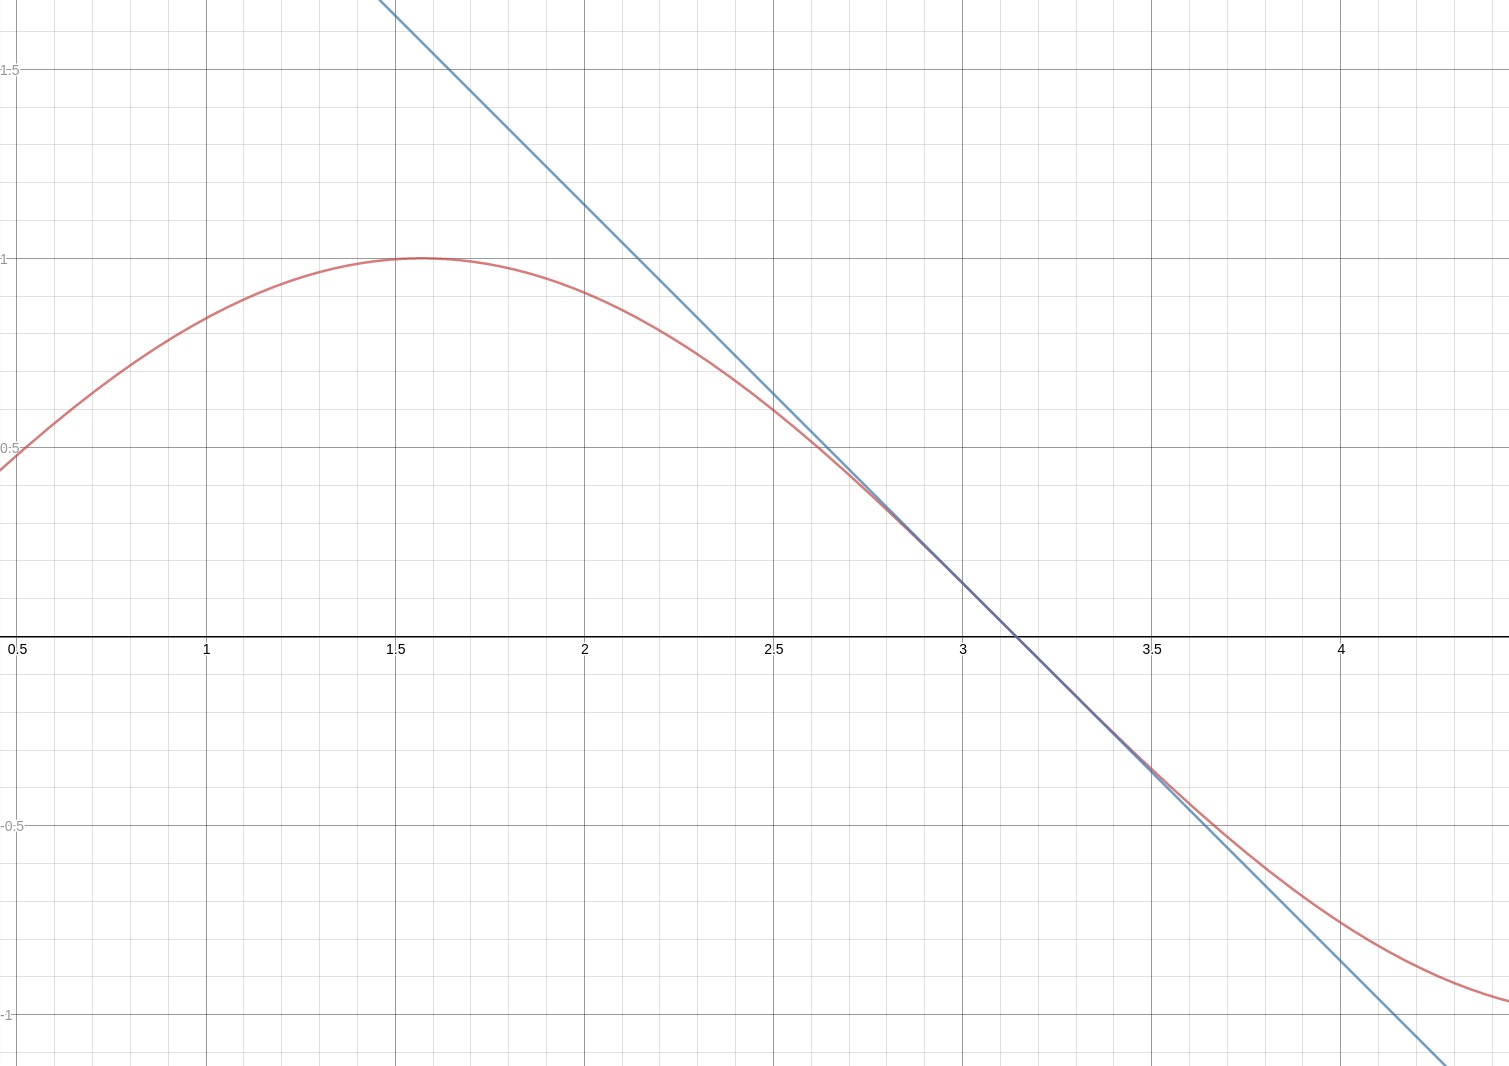 Our linear function versus the actual function.